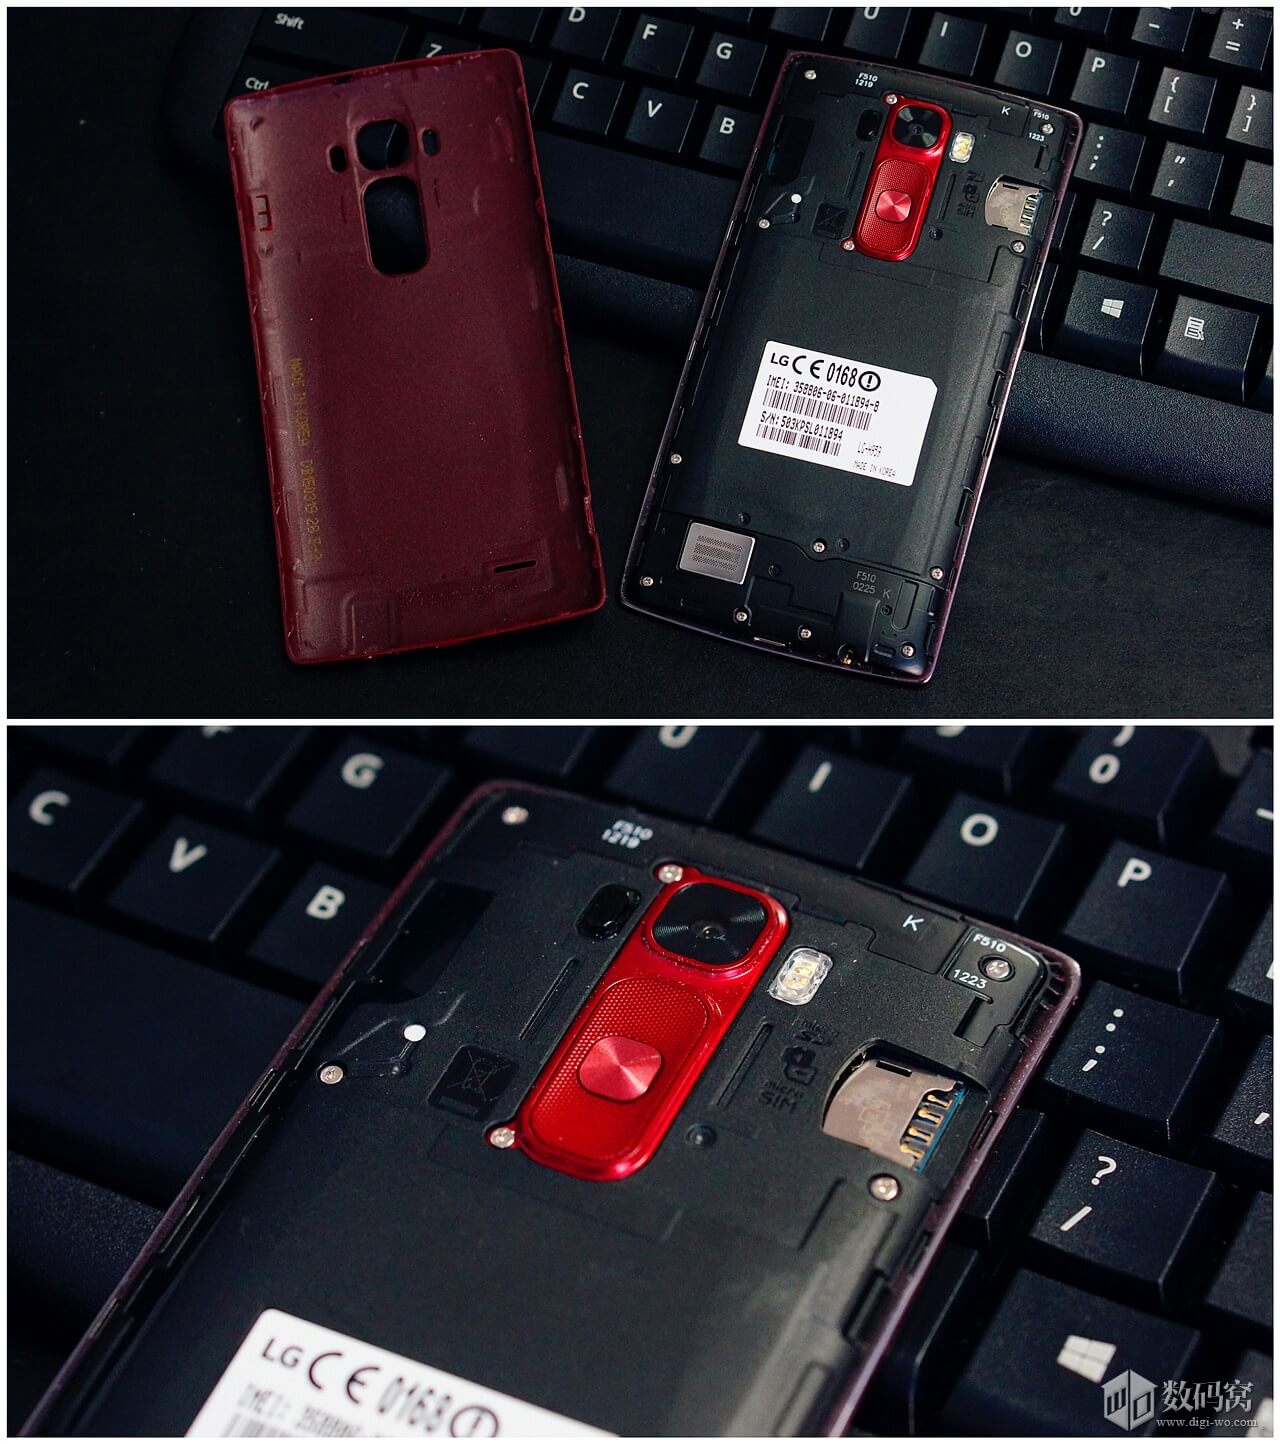 Removable back cover of Red LG G Flex2